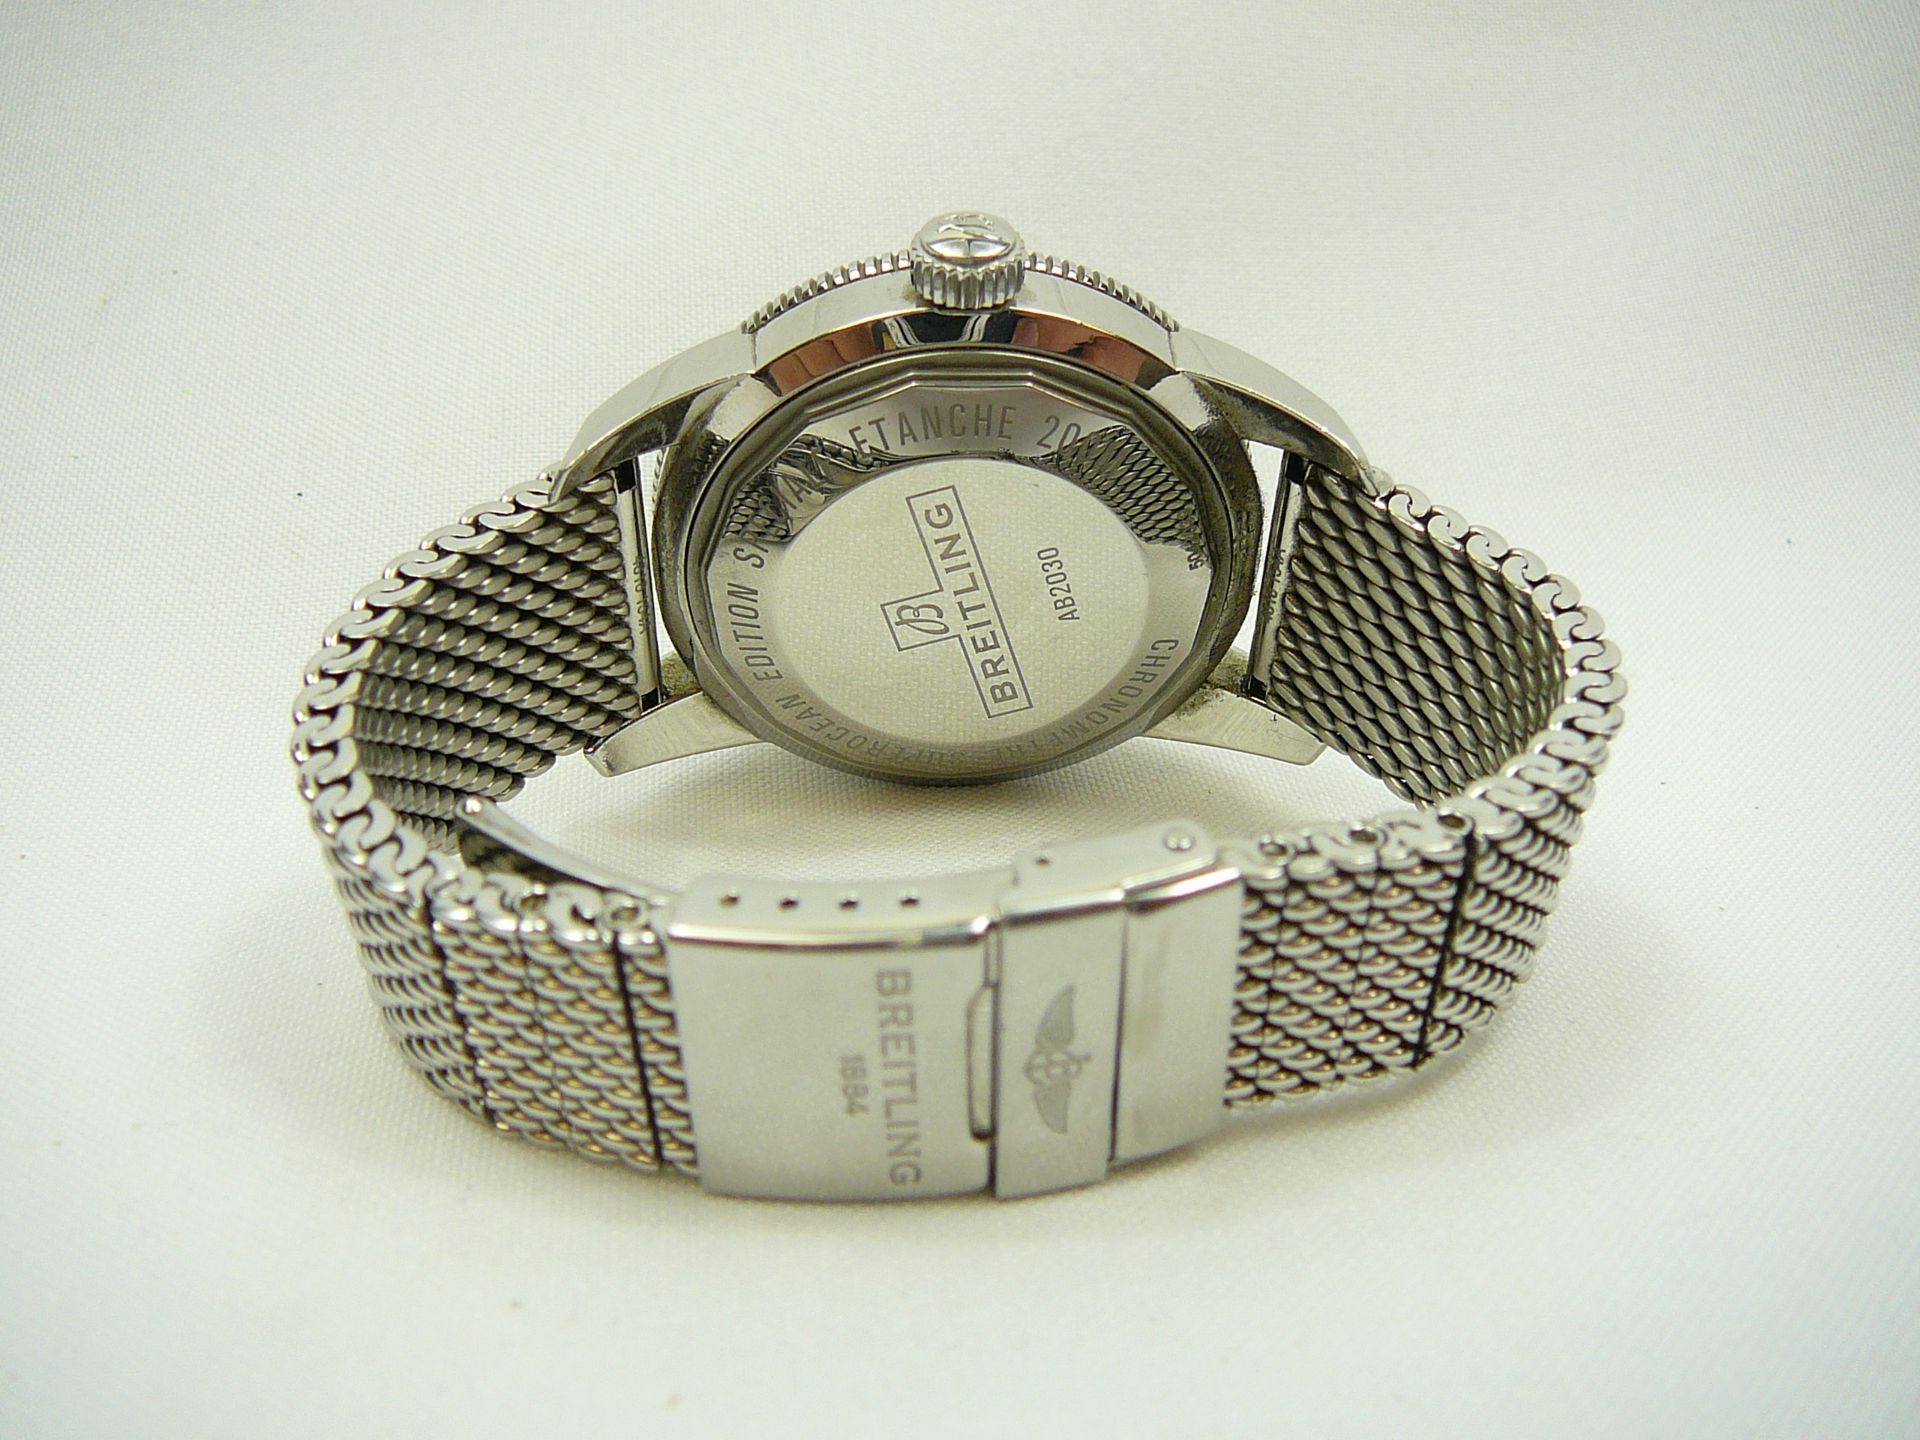 Gents Breitling Wrist Watch - Image 3 of 3